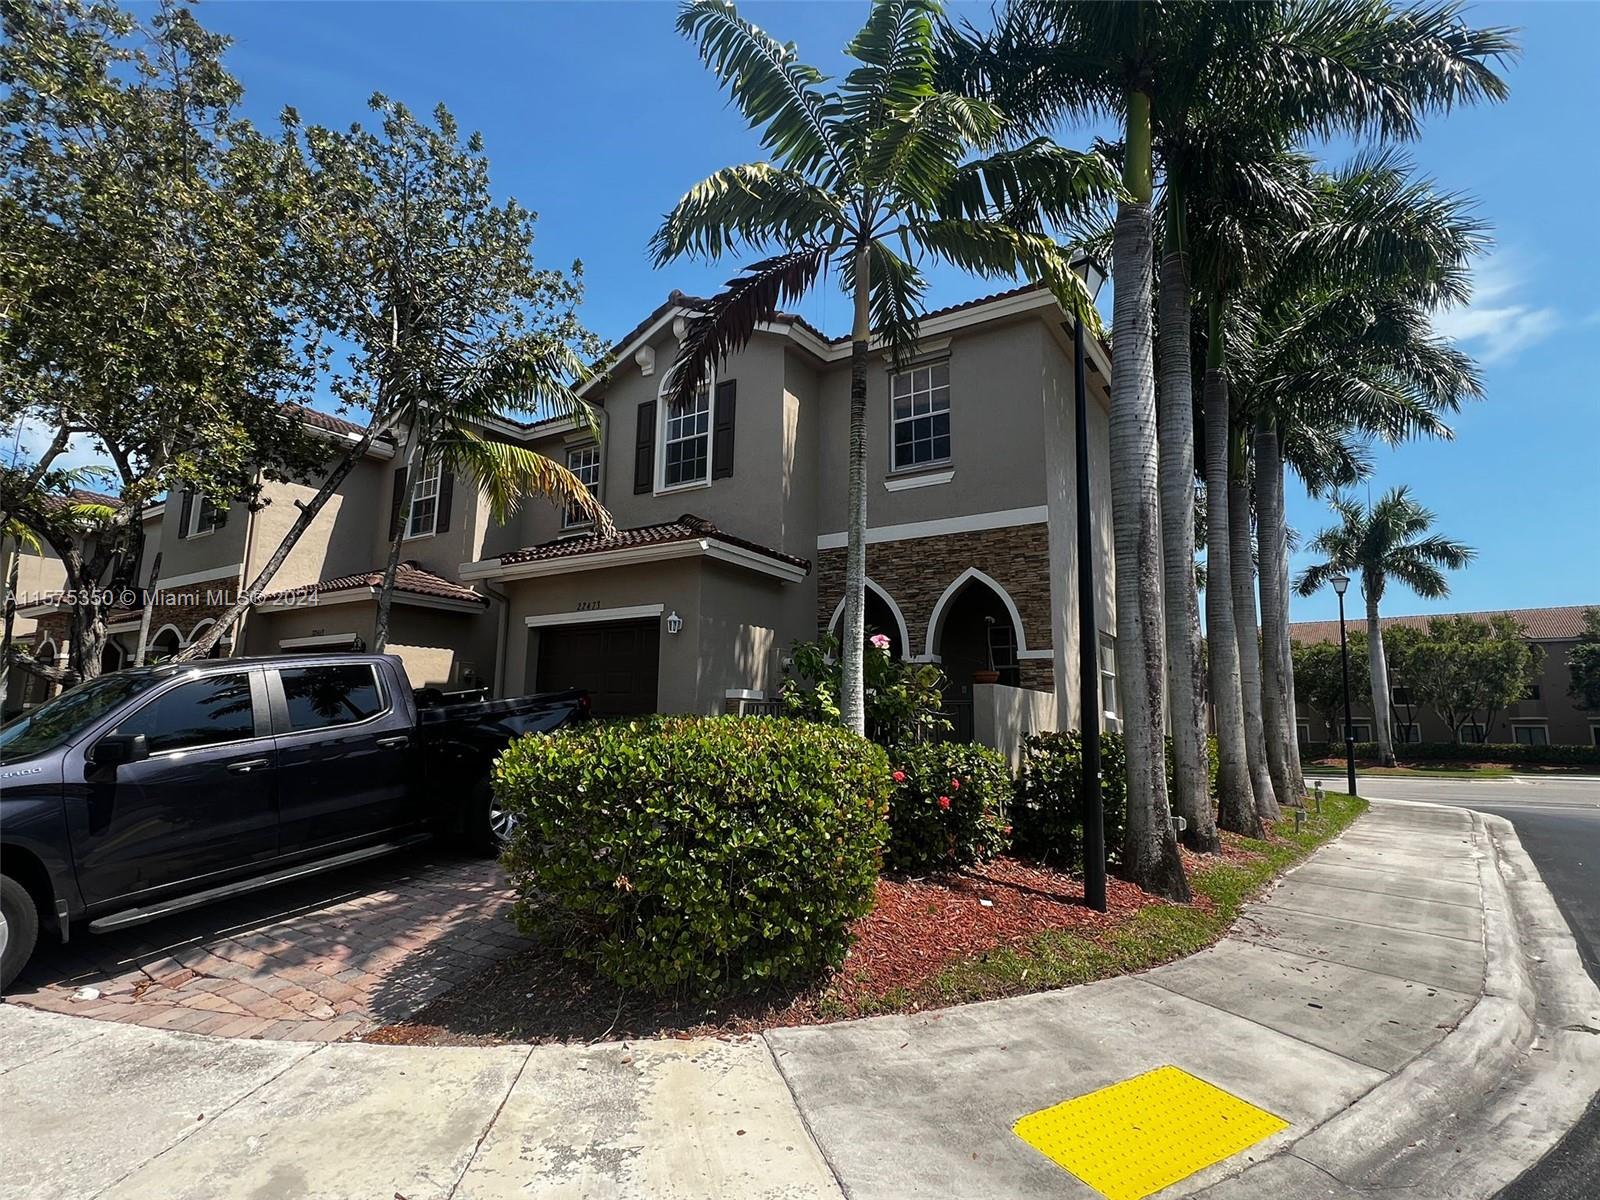 Beautiful corner unit townhome 3/2.5 one car garage, in Isles At Bayshore in Cutler Bay, gated community, great location, Great schools, close to Turnpike, Hospitals, Mall, All tile, paved patio. Easy to show.